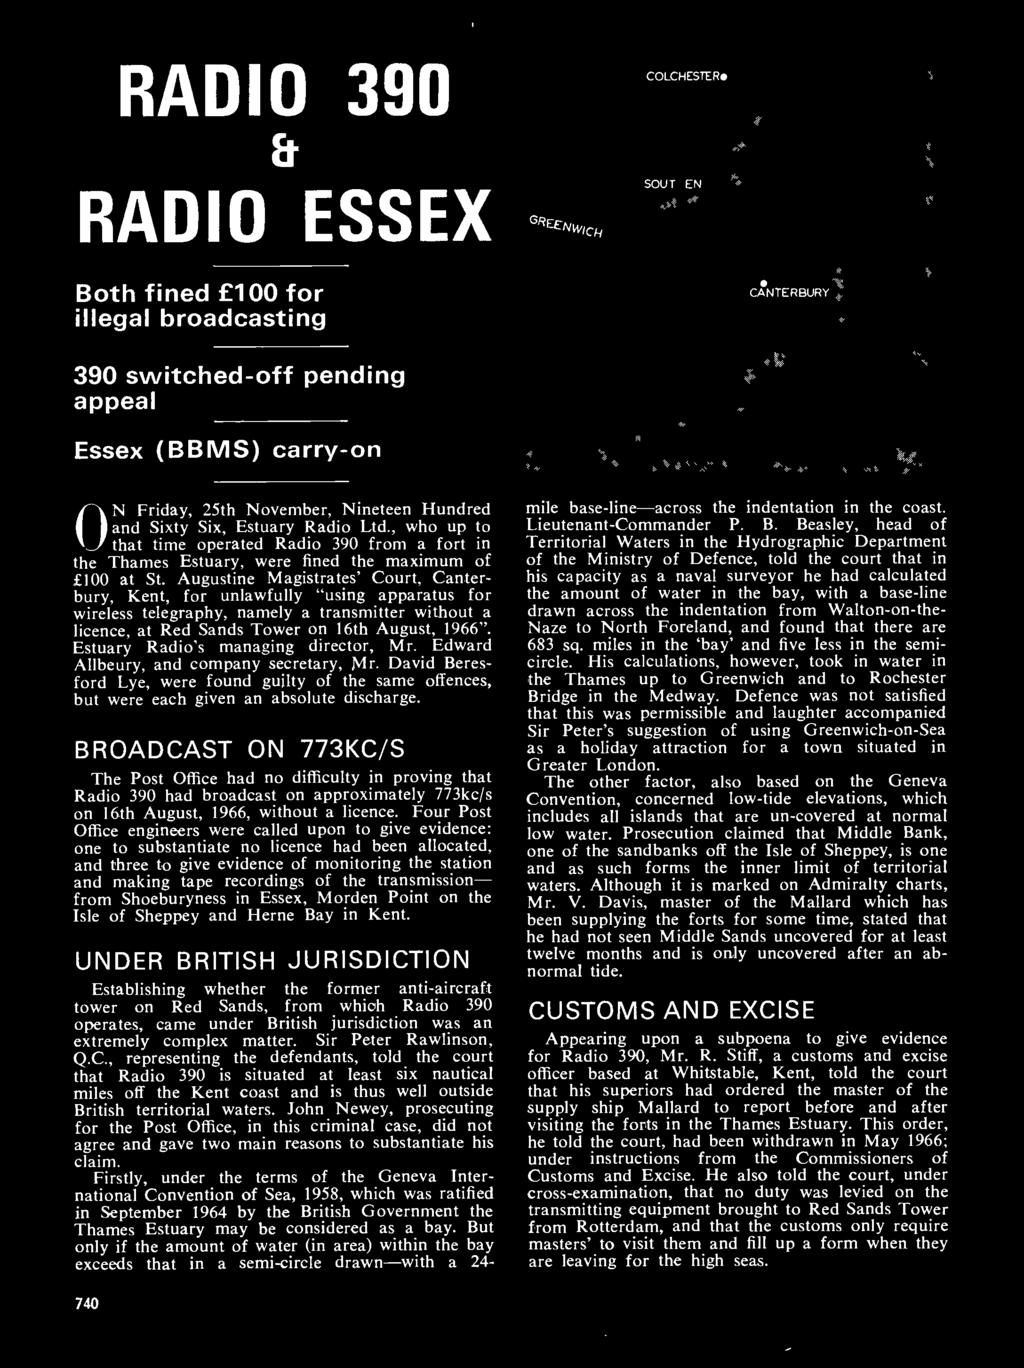 Hundred and Sixty Six, Estuary Radio Ltd., who up to that time operated Radio 390 from a fort in the Thames Estuary, were fined the maximum of 100 at St.